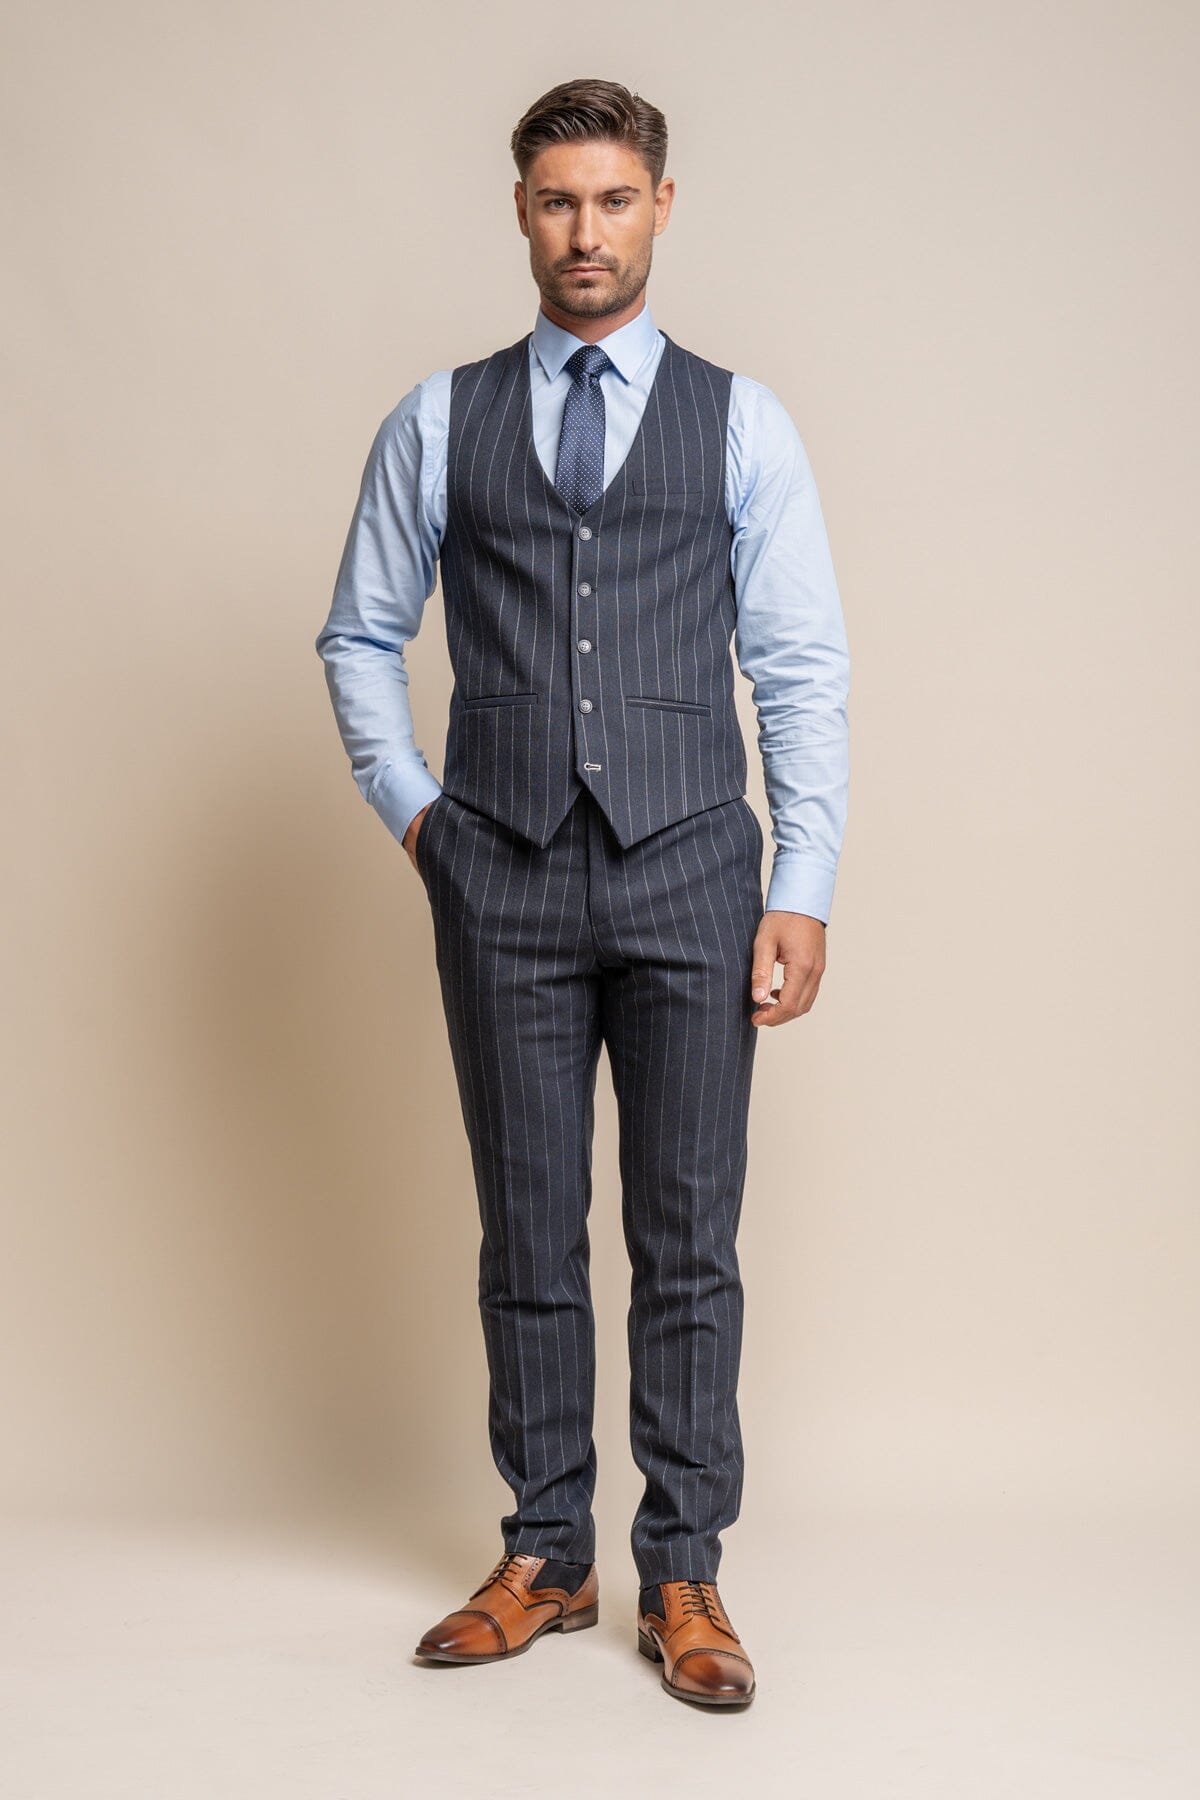 Invincible Navy Pinstripe Trousers - Trousers - 